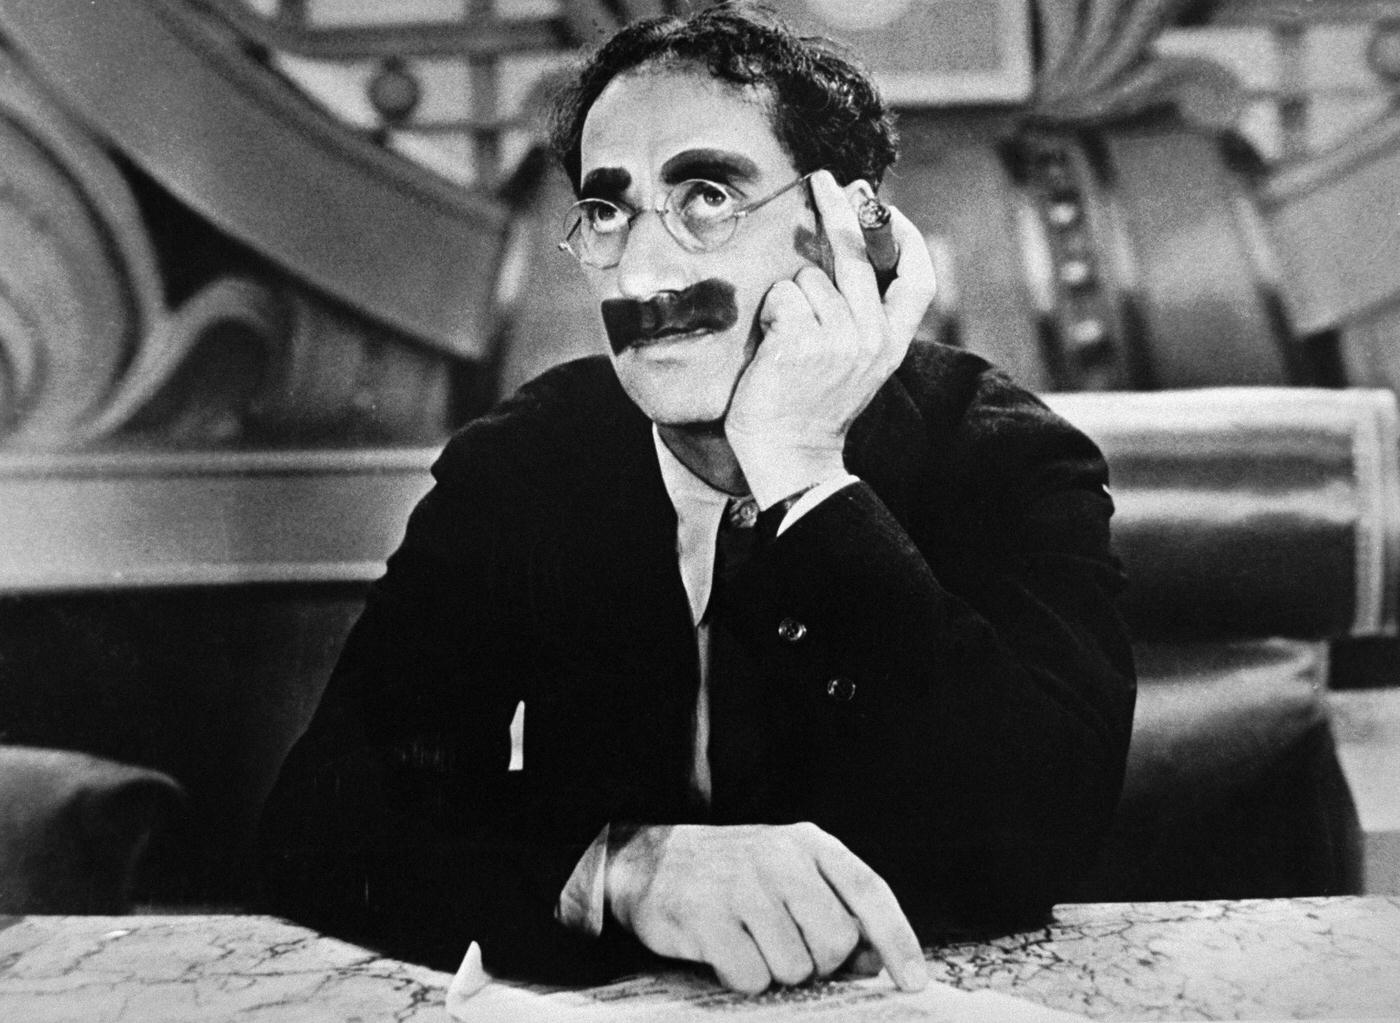 Groucho Marx as Rufus T. Firefly in Duck Soup (1933)